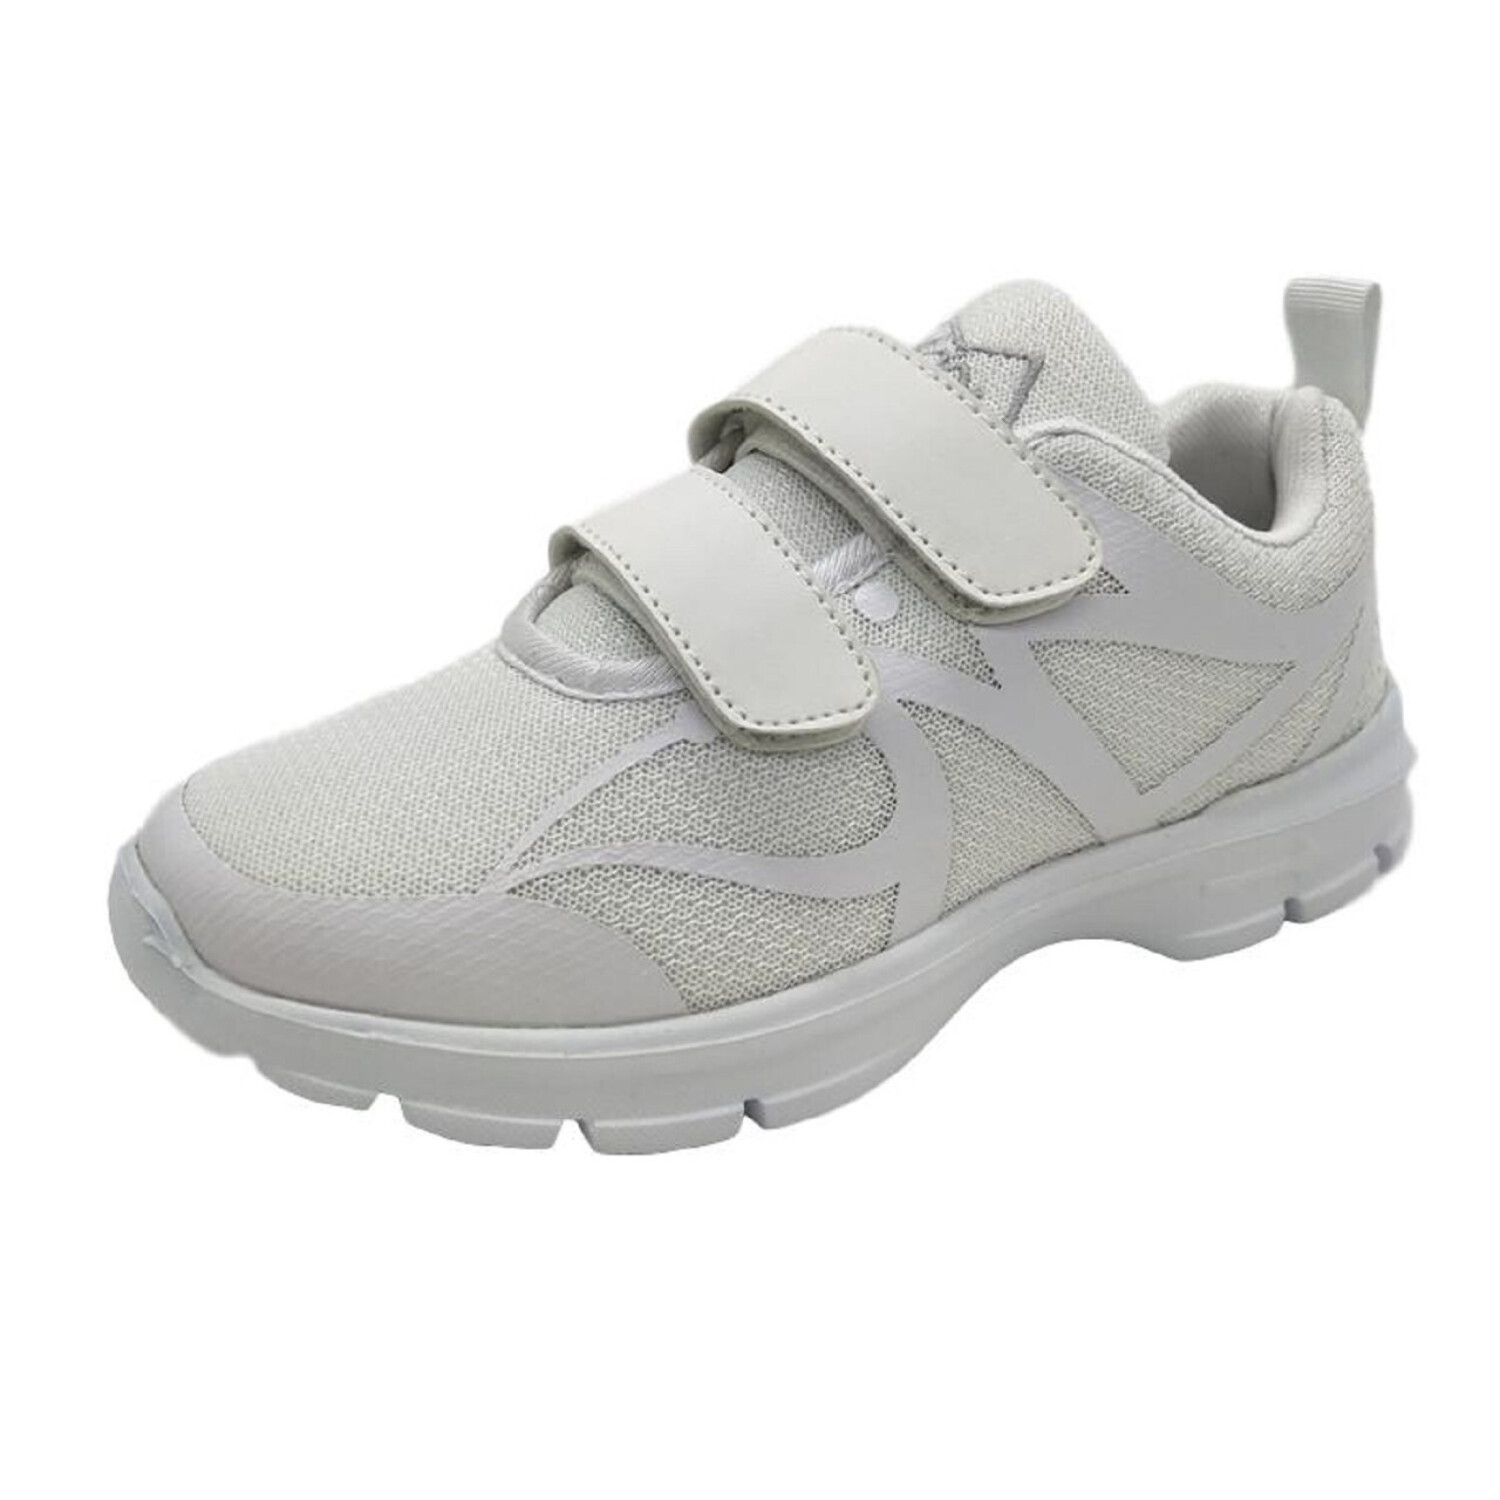 MAIR Mens Ultra-Light Double Hook-and-Loop PACER WHITE Athletic Mesh Sneaker Shoe - image 1 of 3